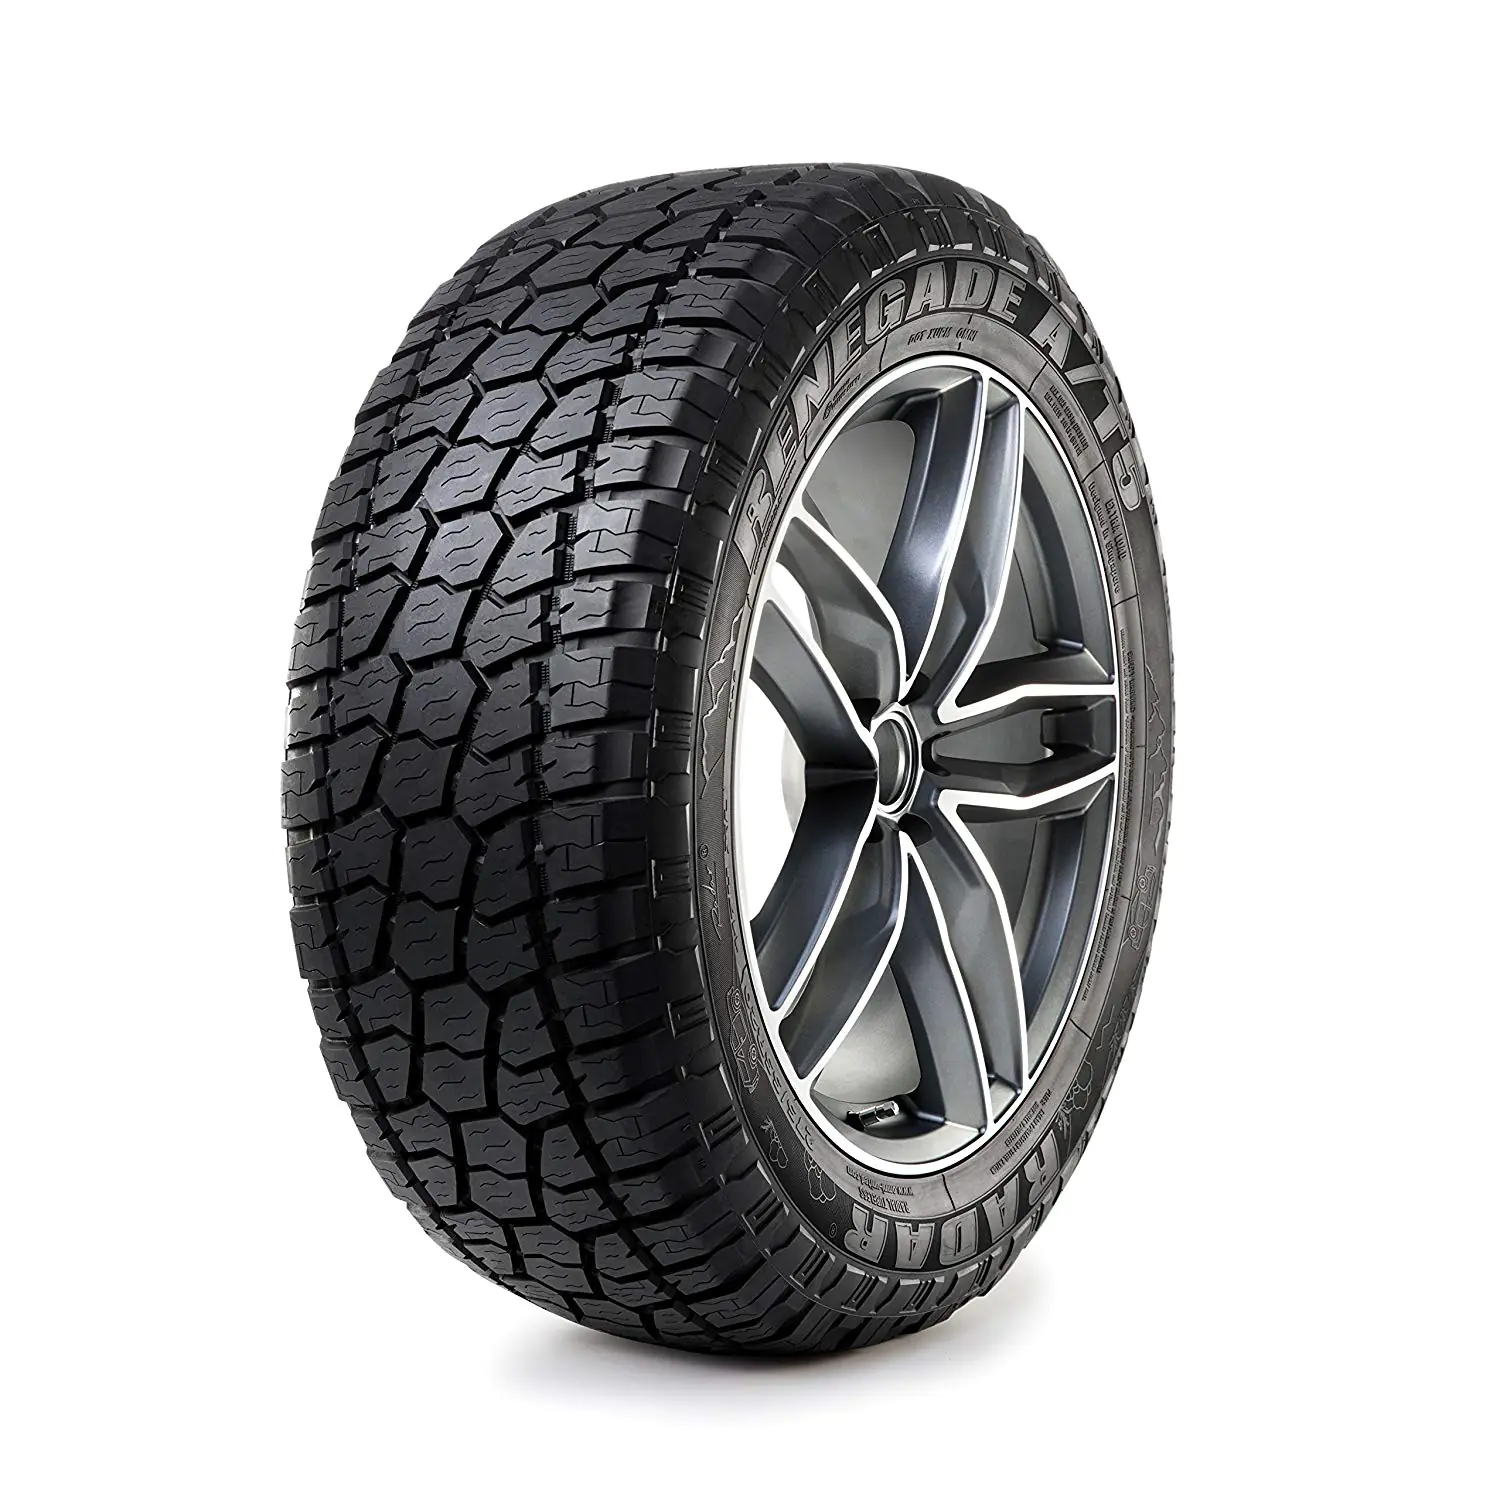 Gomme Autovettura Radar 235/85 R16 120S RENEGADE A/T (AT-5 M+S All Season